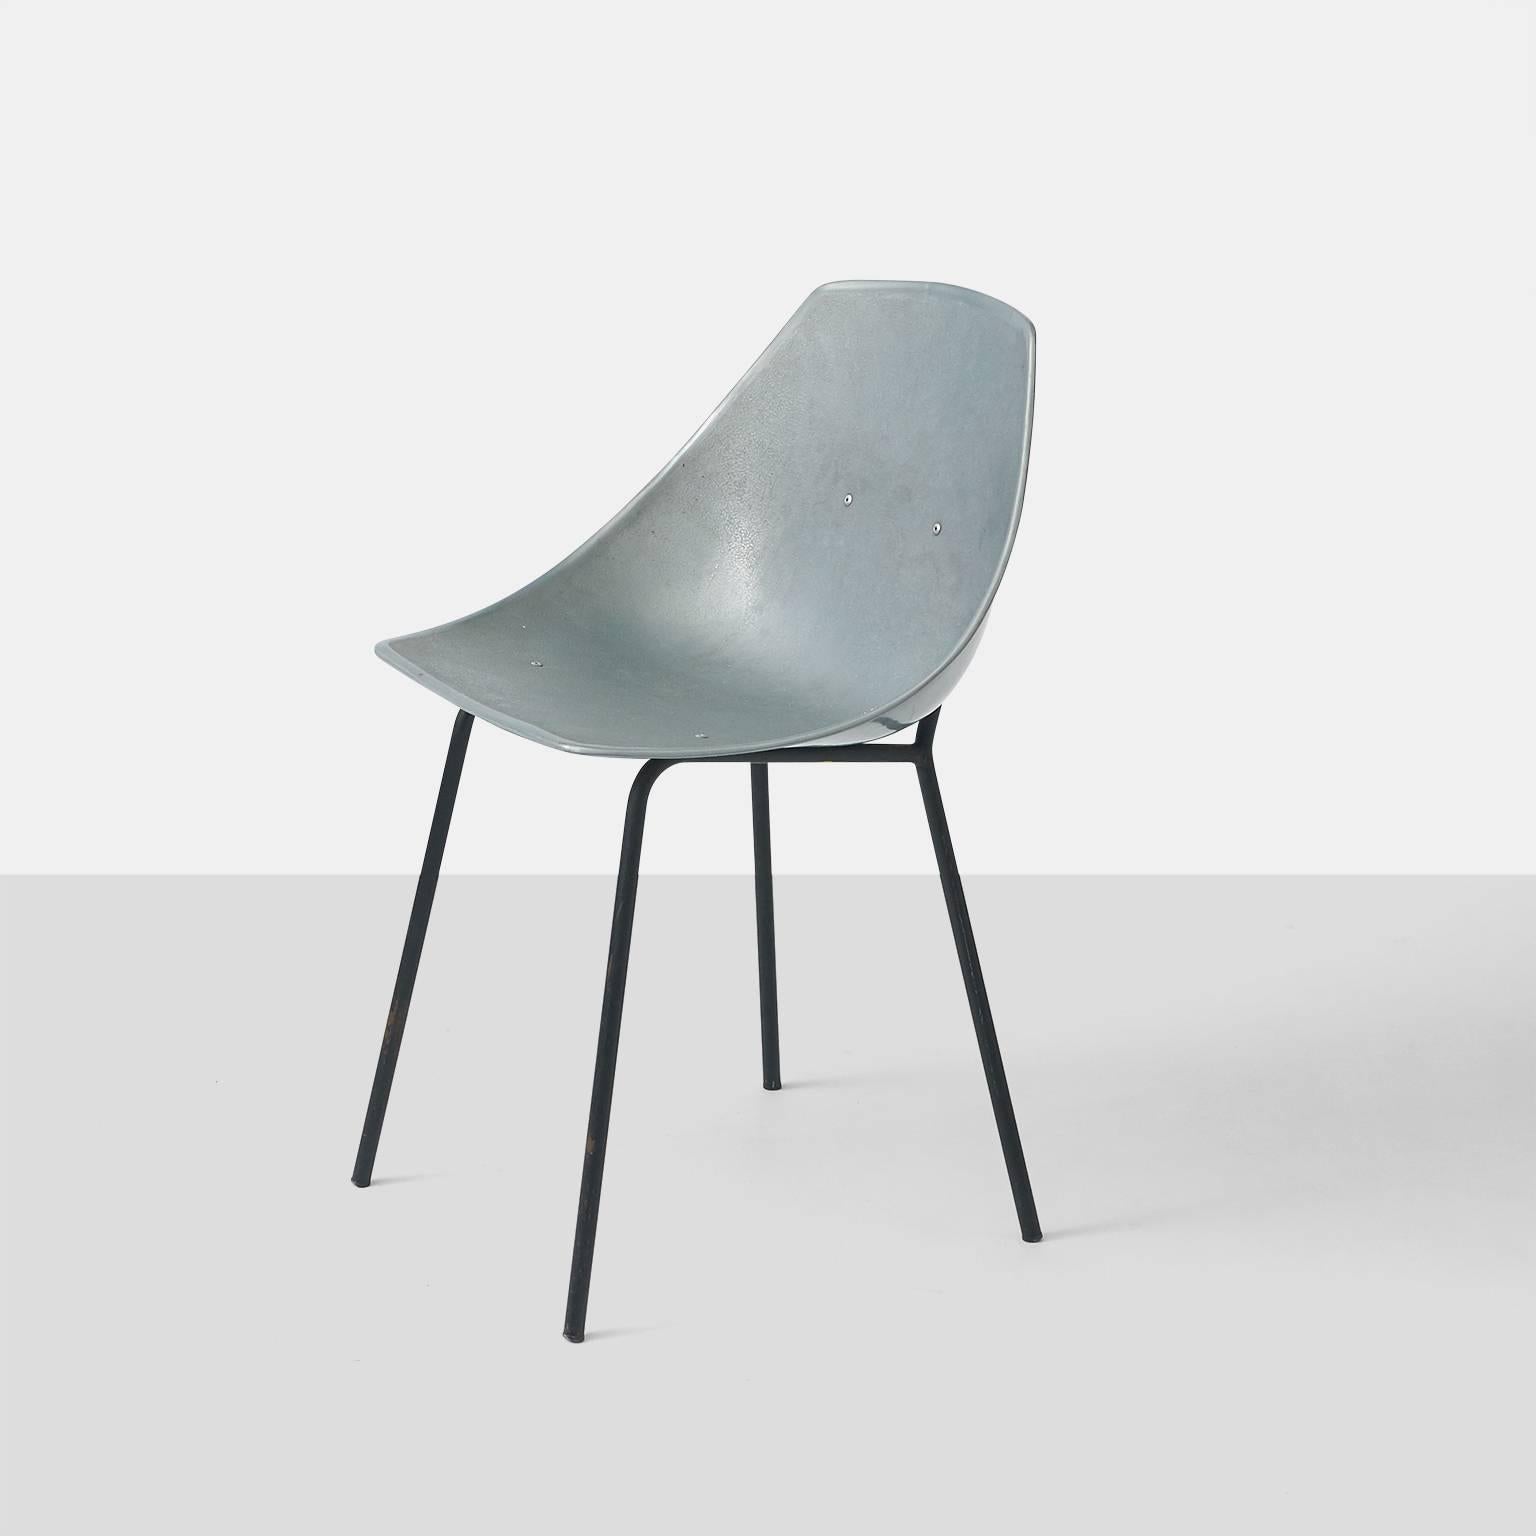 A side chair by Pierre Guariche in gray plastic with tubular black metal frame. This model ‘Coquillage’ was manufactured by Meurop and retains the original label.
Belgium, 1960s.